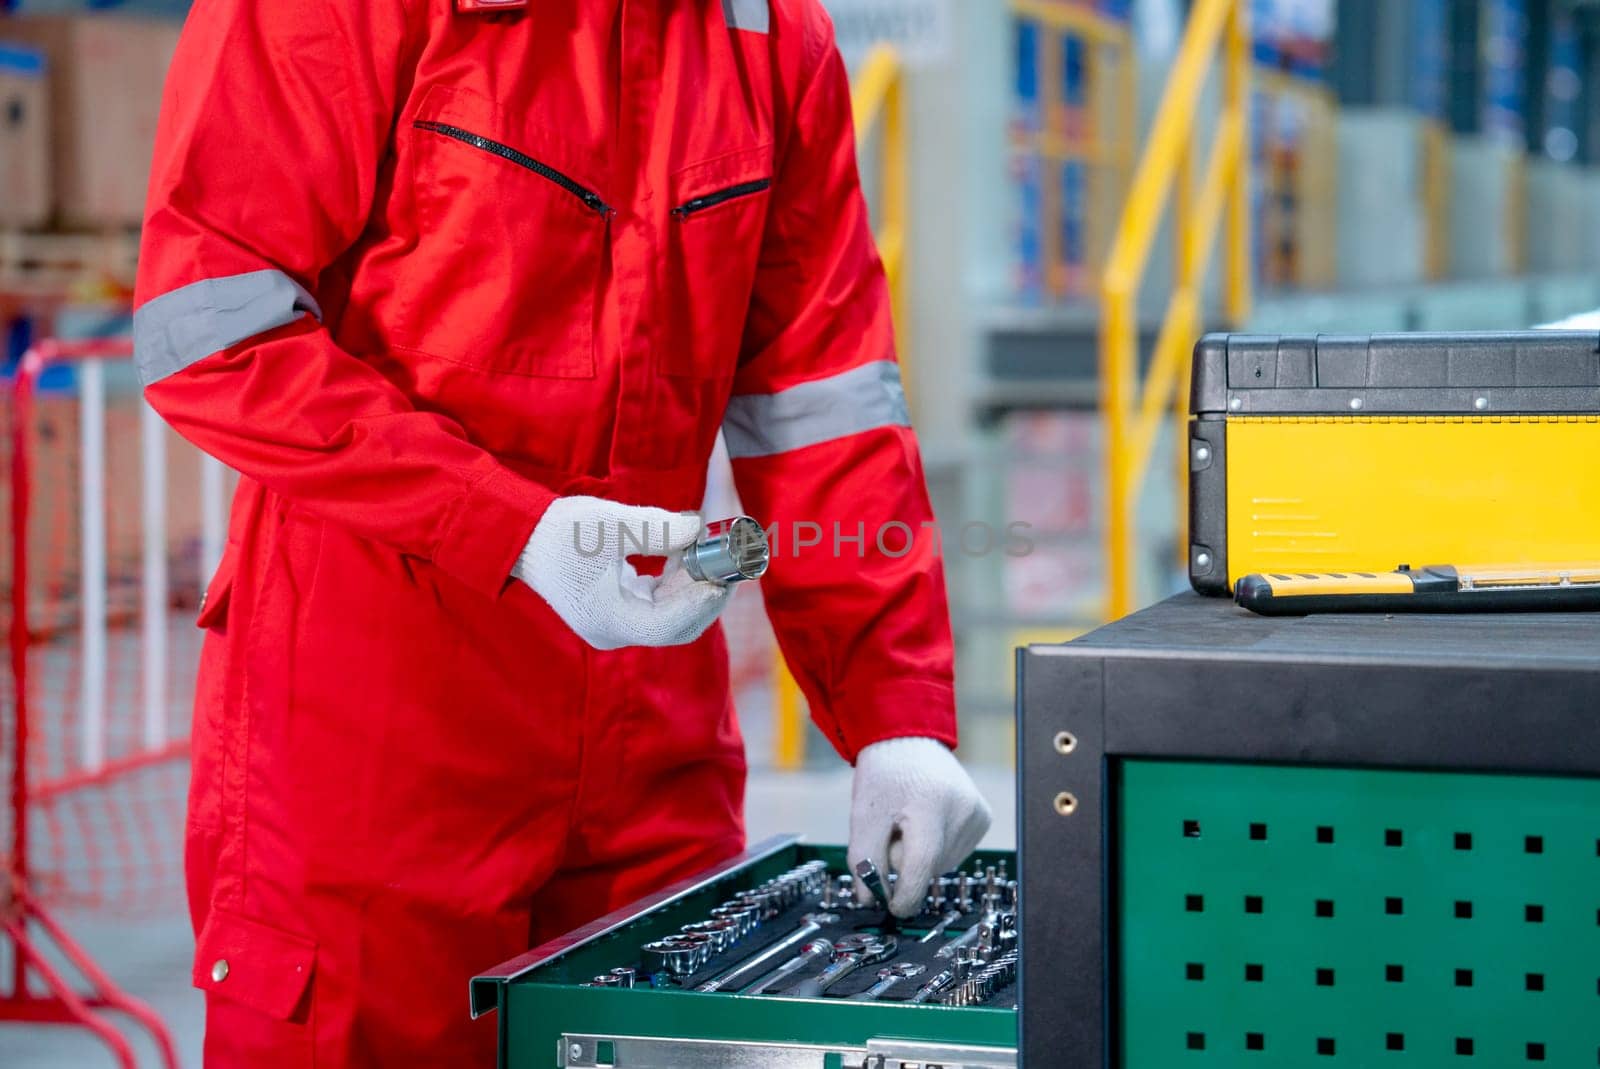 Side view of hands of technician worker hold screw nut and check tools or equipment in the cabinet in front of railroad tracks of electrical or sky train in factory workplace.